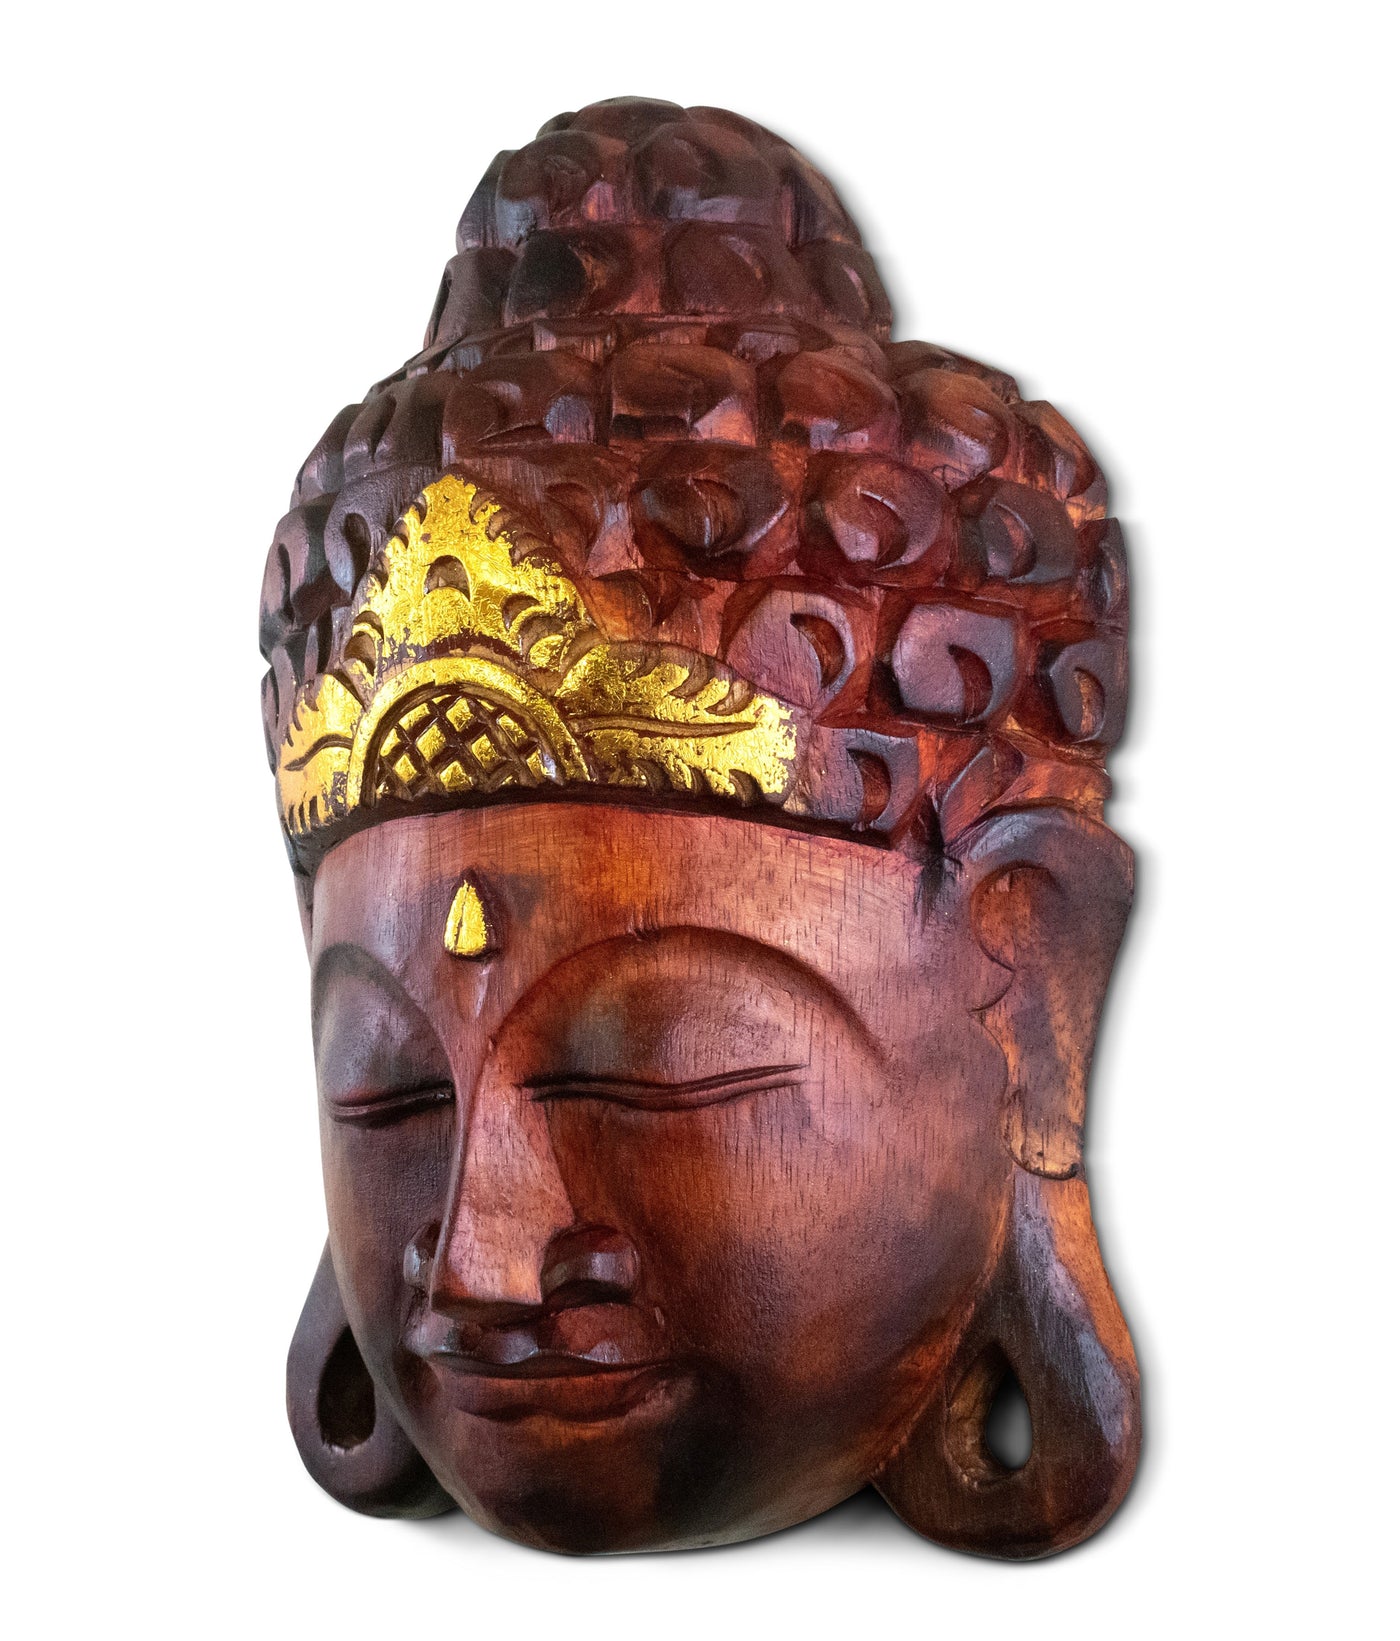 Wooden Wall Mask Serene Brown Buddha Head Statue Hand Carved Sculpture Handmade Figurine Gift Home Decor Accent Handcrafted Wall Hanging Decoration